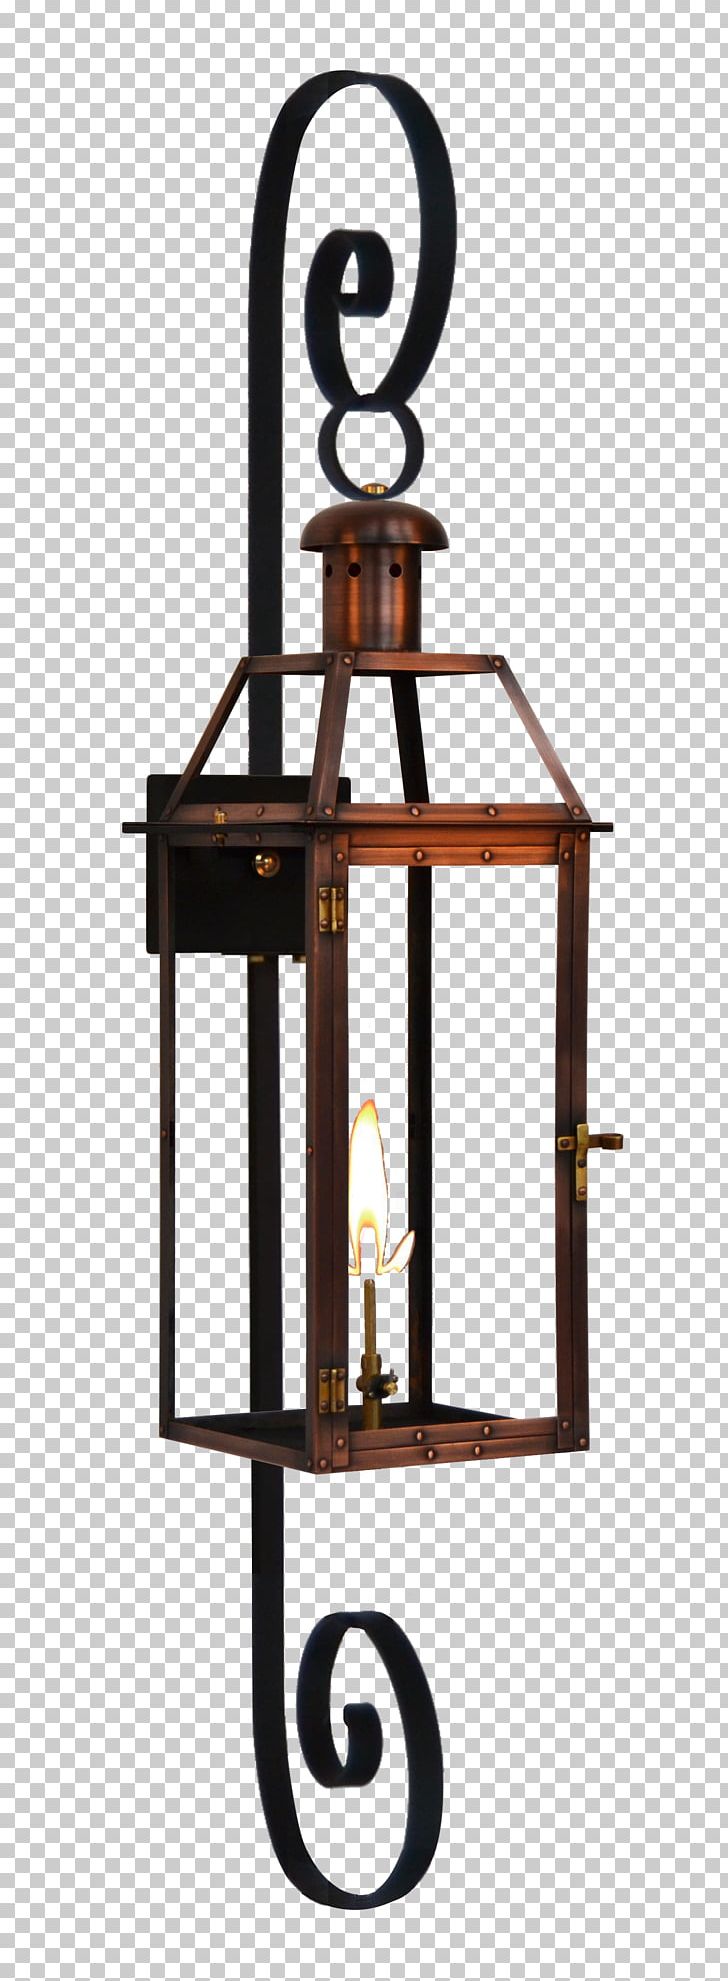 Light Fixture Lantern Gas Lighting Street Light PNG, Clipart, Candlestick, Coppersmith, Electricity, Electric Light, French Free PNG Download